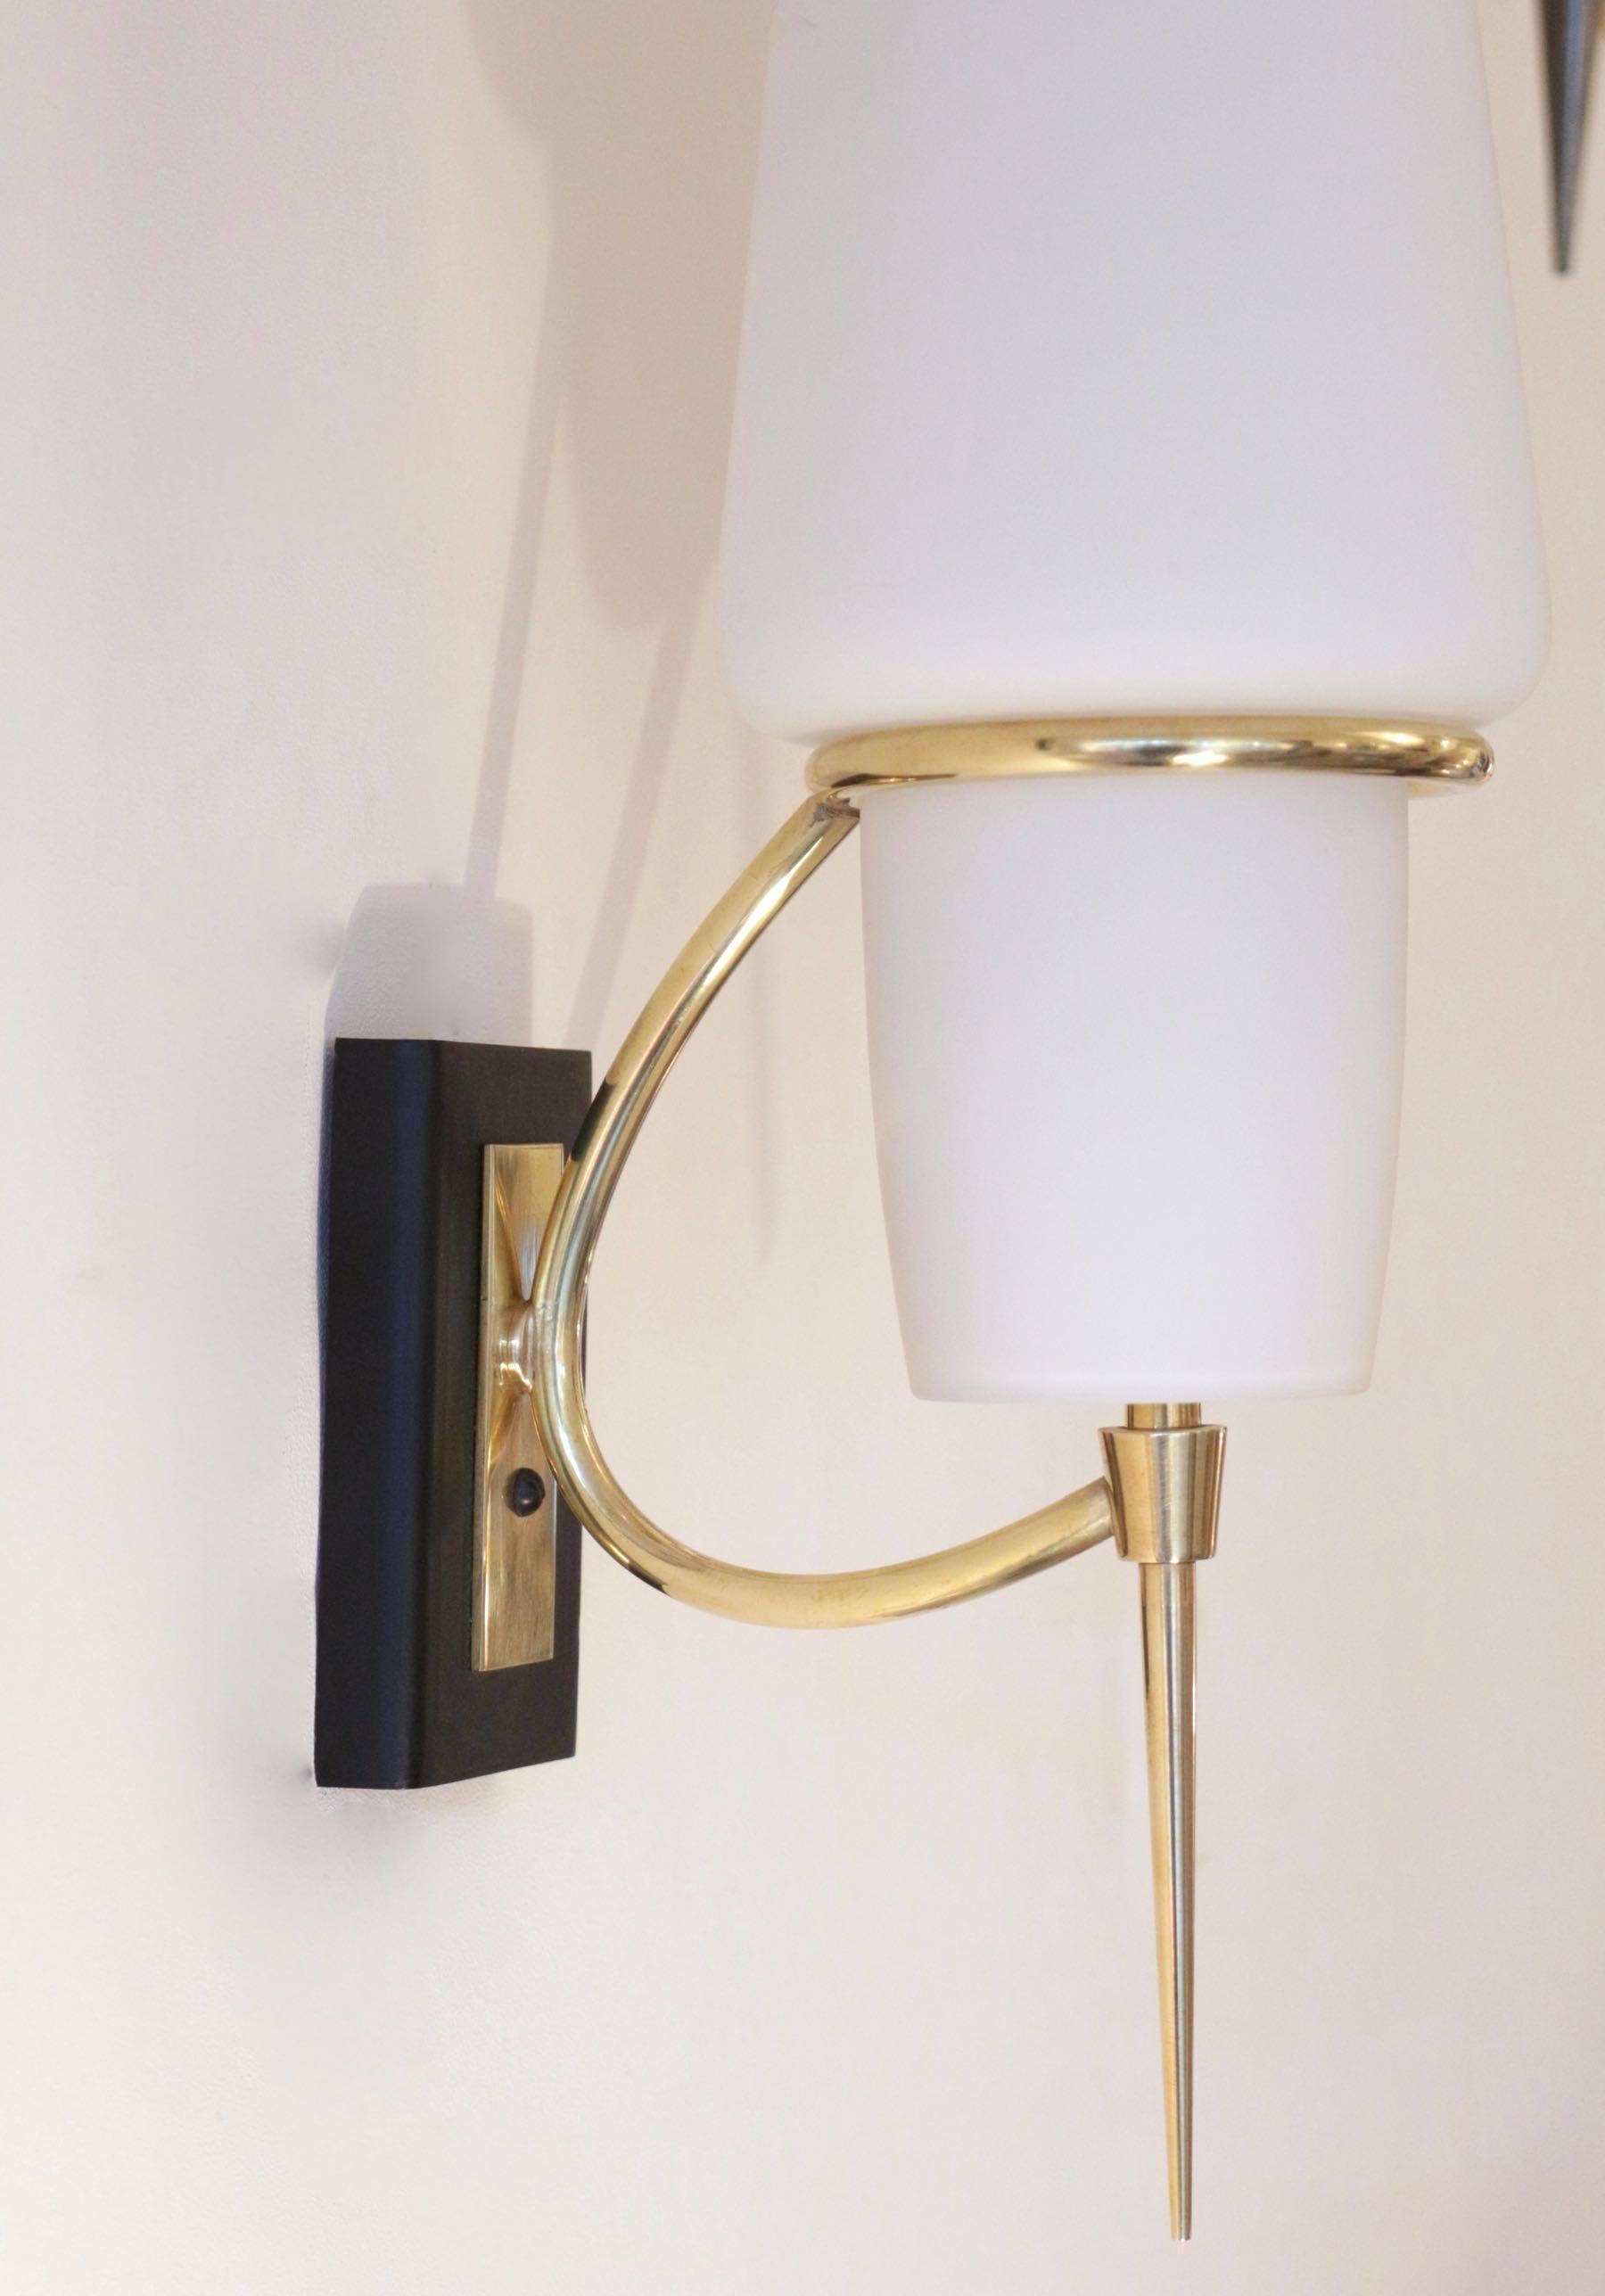 1950s Maison Lunel sconces.

Black lacquered back plate highlighted with a brass rectangular plate.
A brass buckle ended with a trapered brass stem, supports a withe opaline glass lampshade.

One bulb per sconce.
   